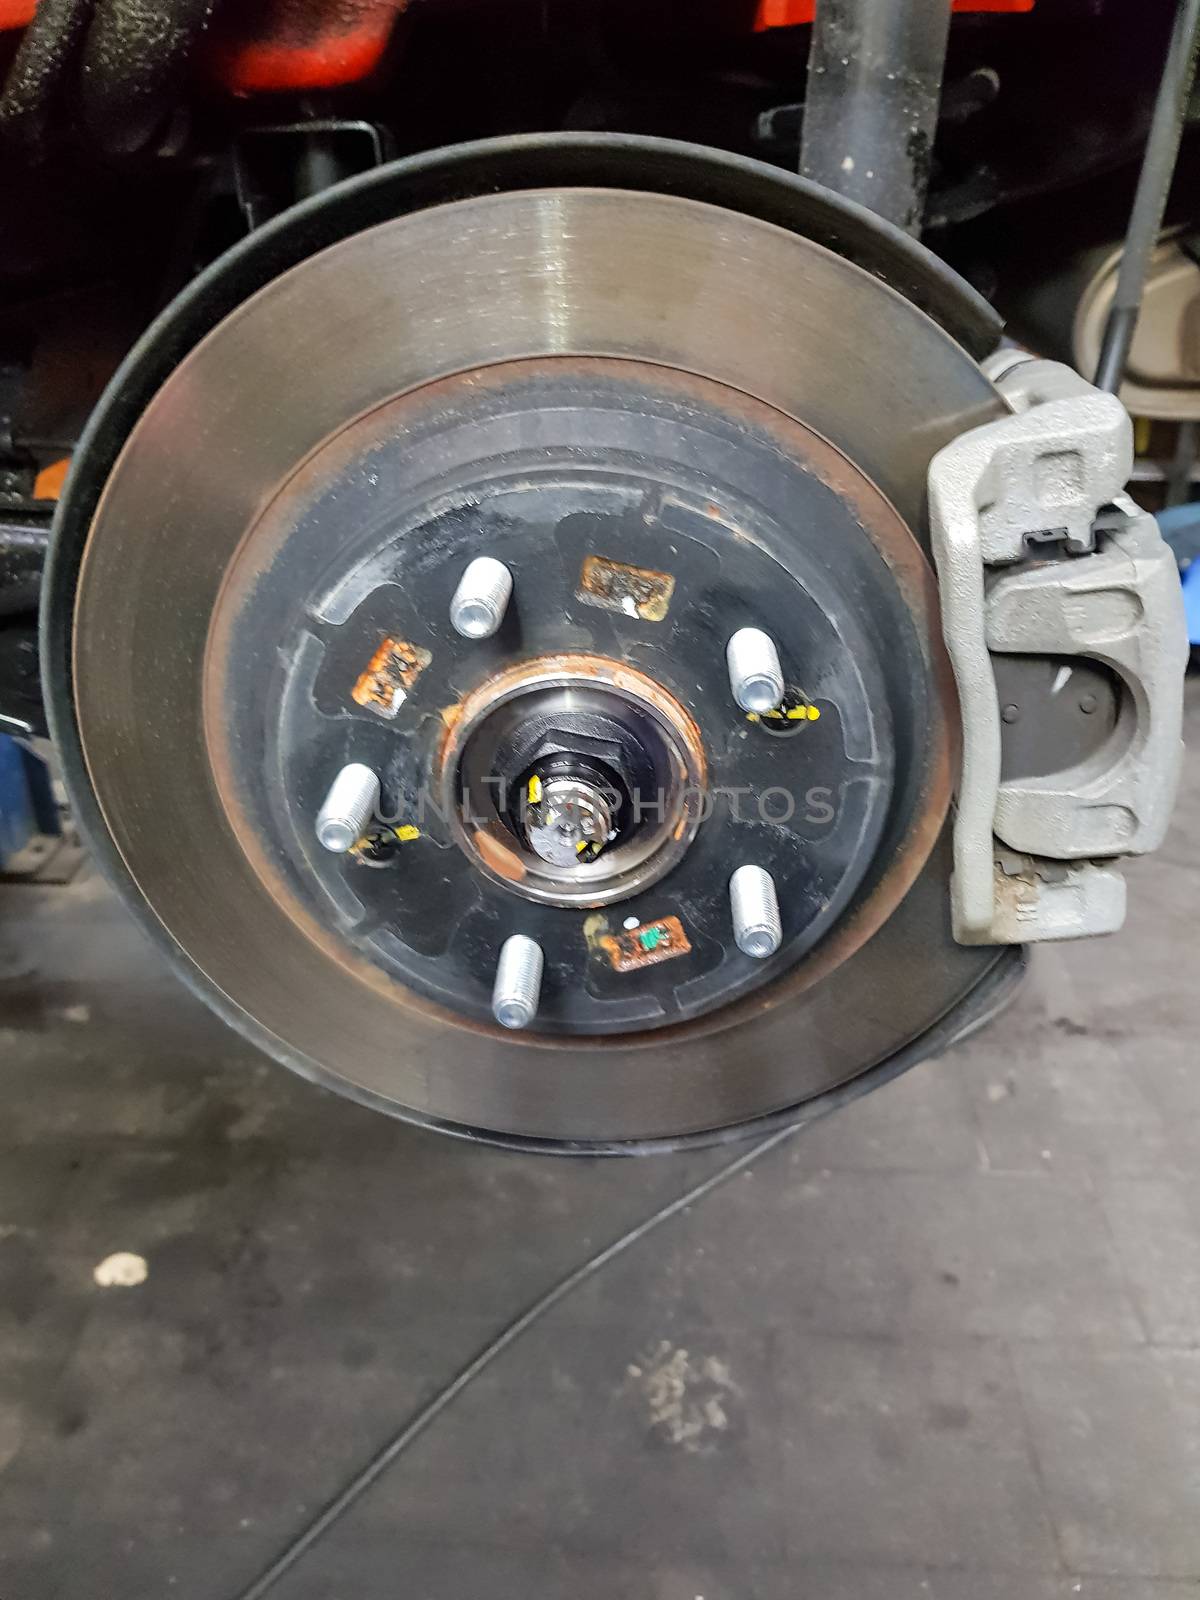 Brakes on a car with degraded tires  by JFsPic